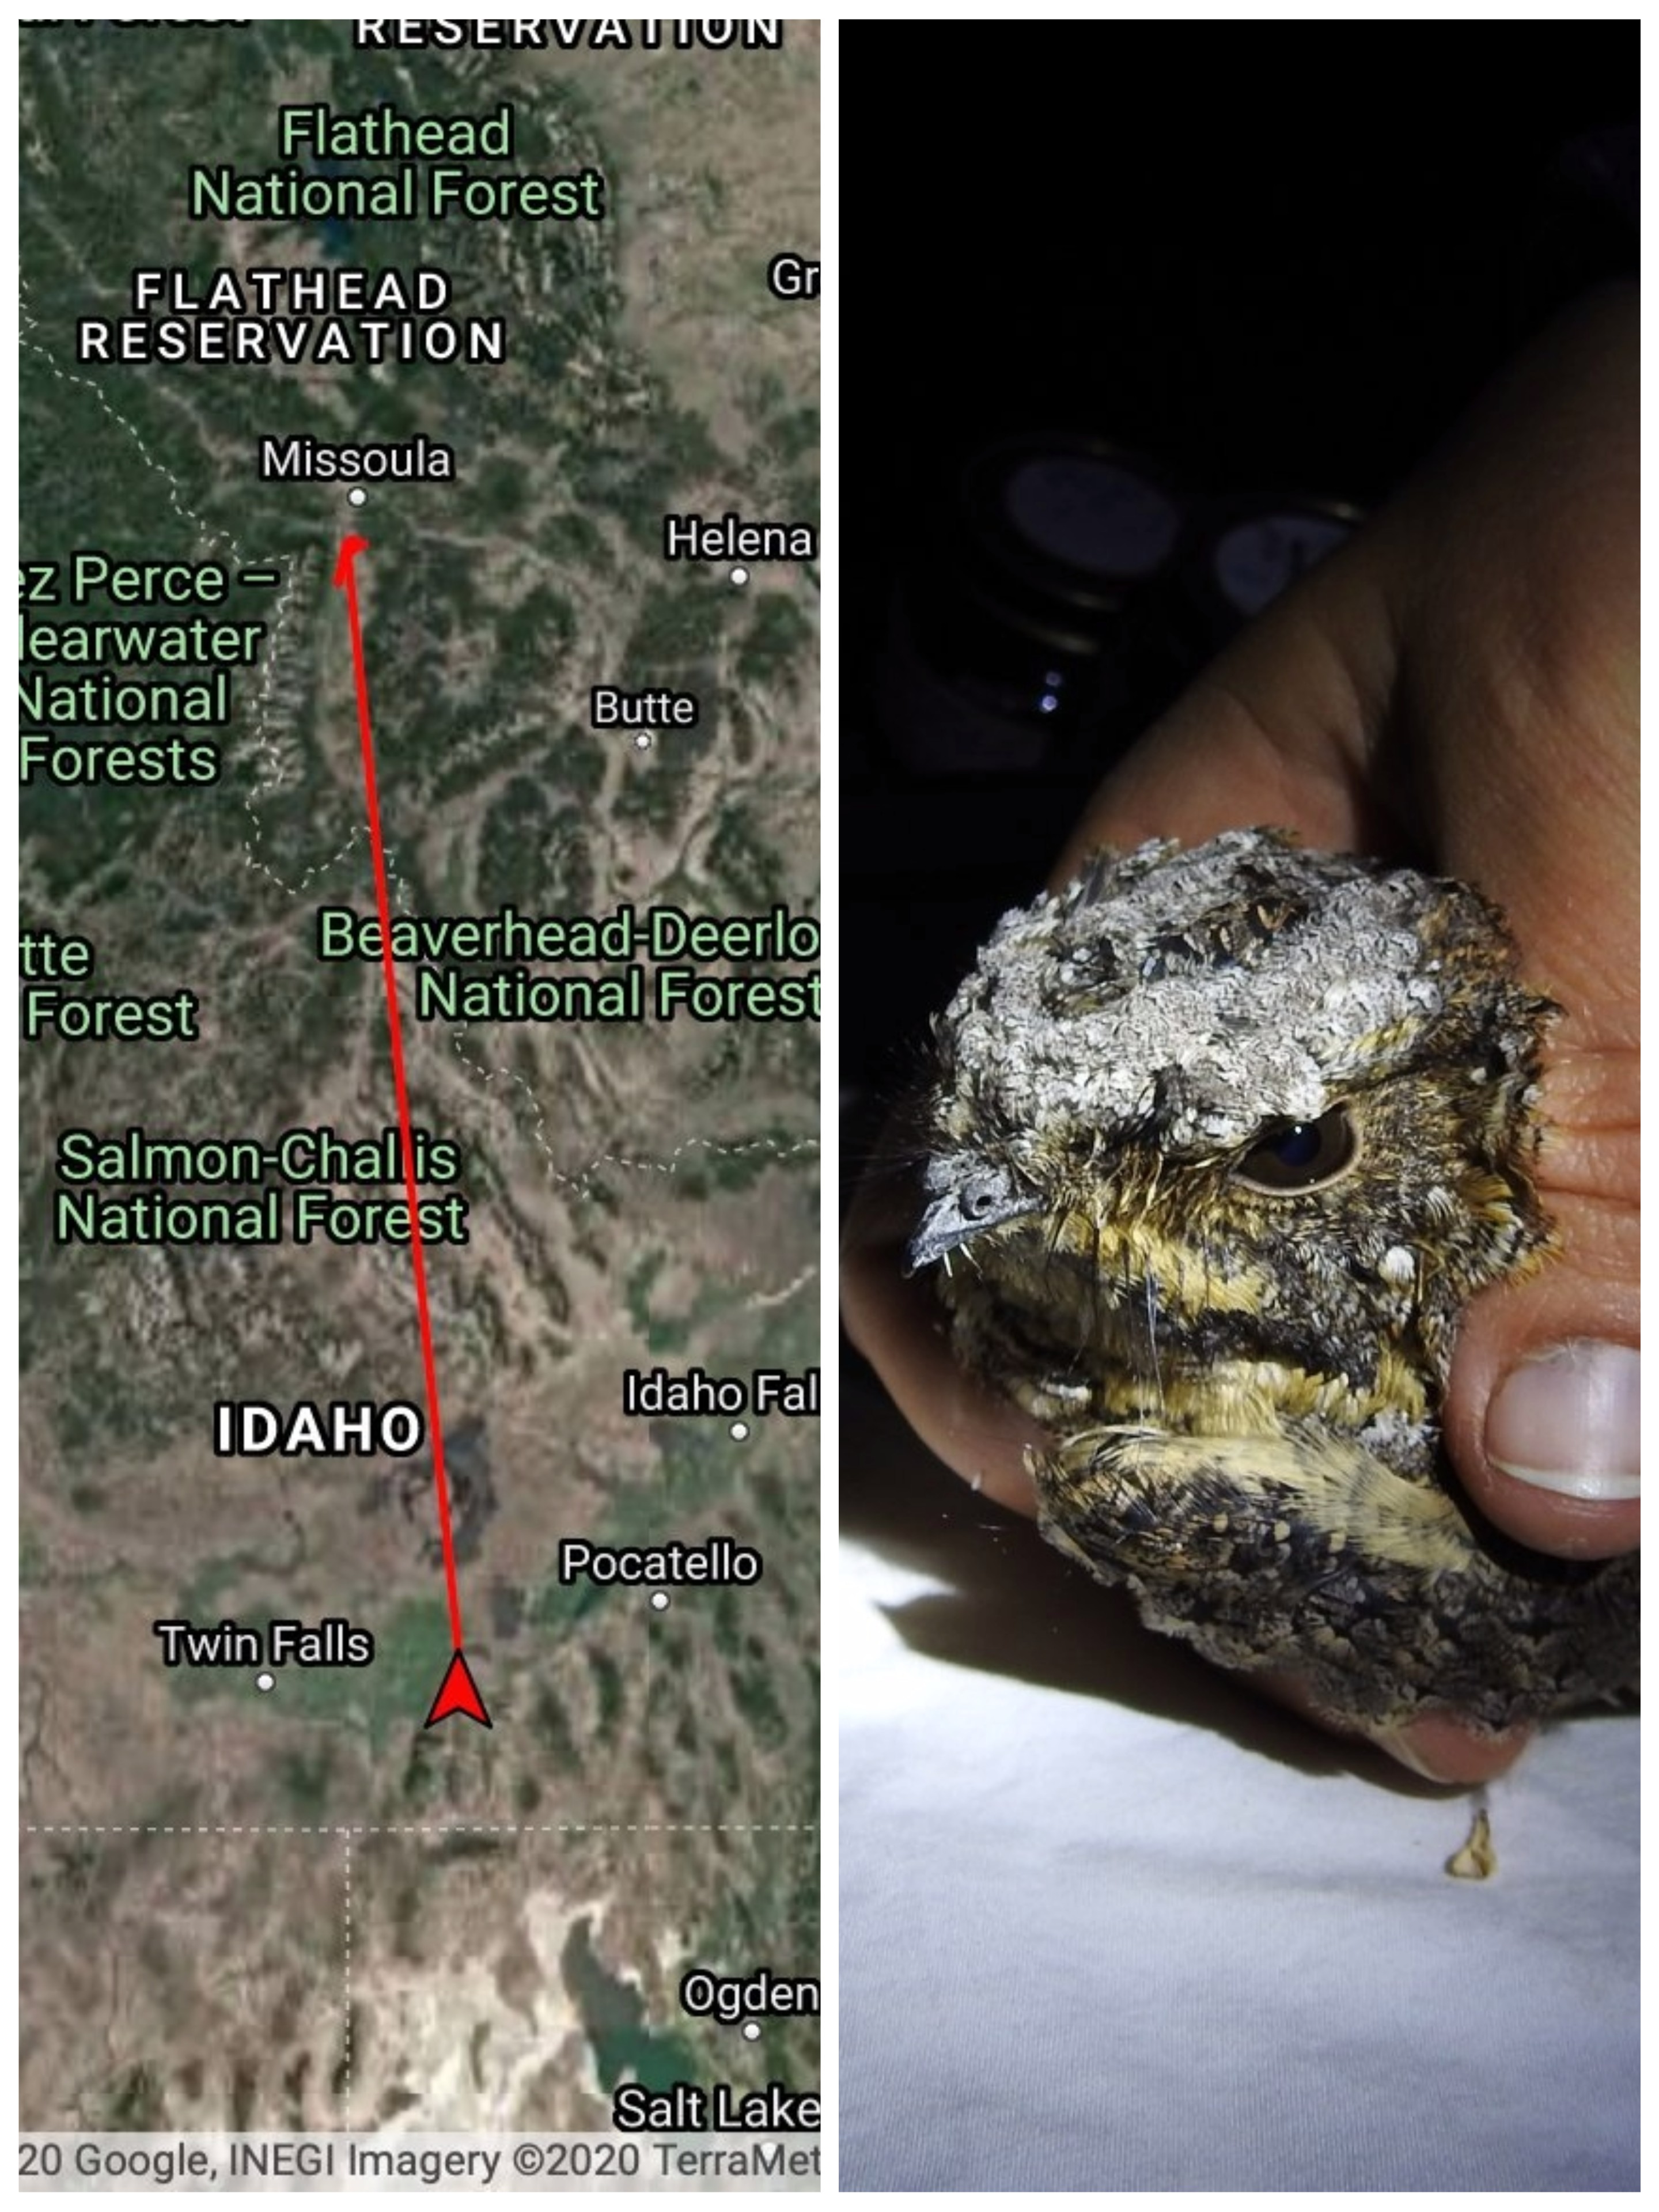 left image displays a map with a pin near Missoula Montana and a track leading to Idaho between Twin Falls and Pocatello. right image shows a biologists hand holding a speckled gray and brown bird in the light of a flashlight